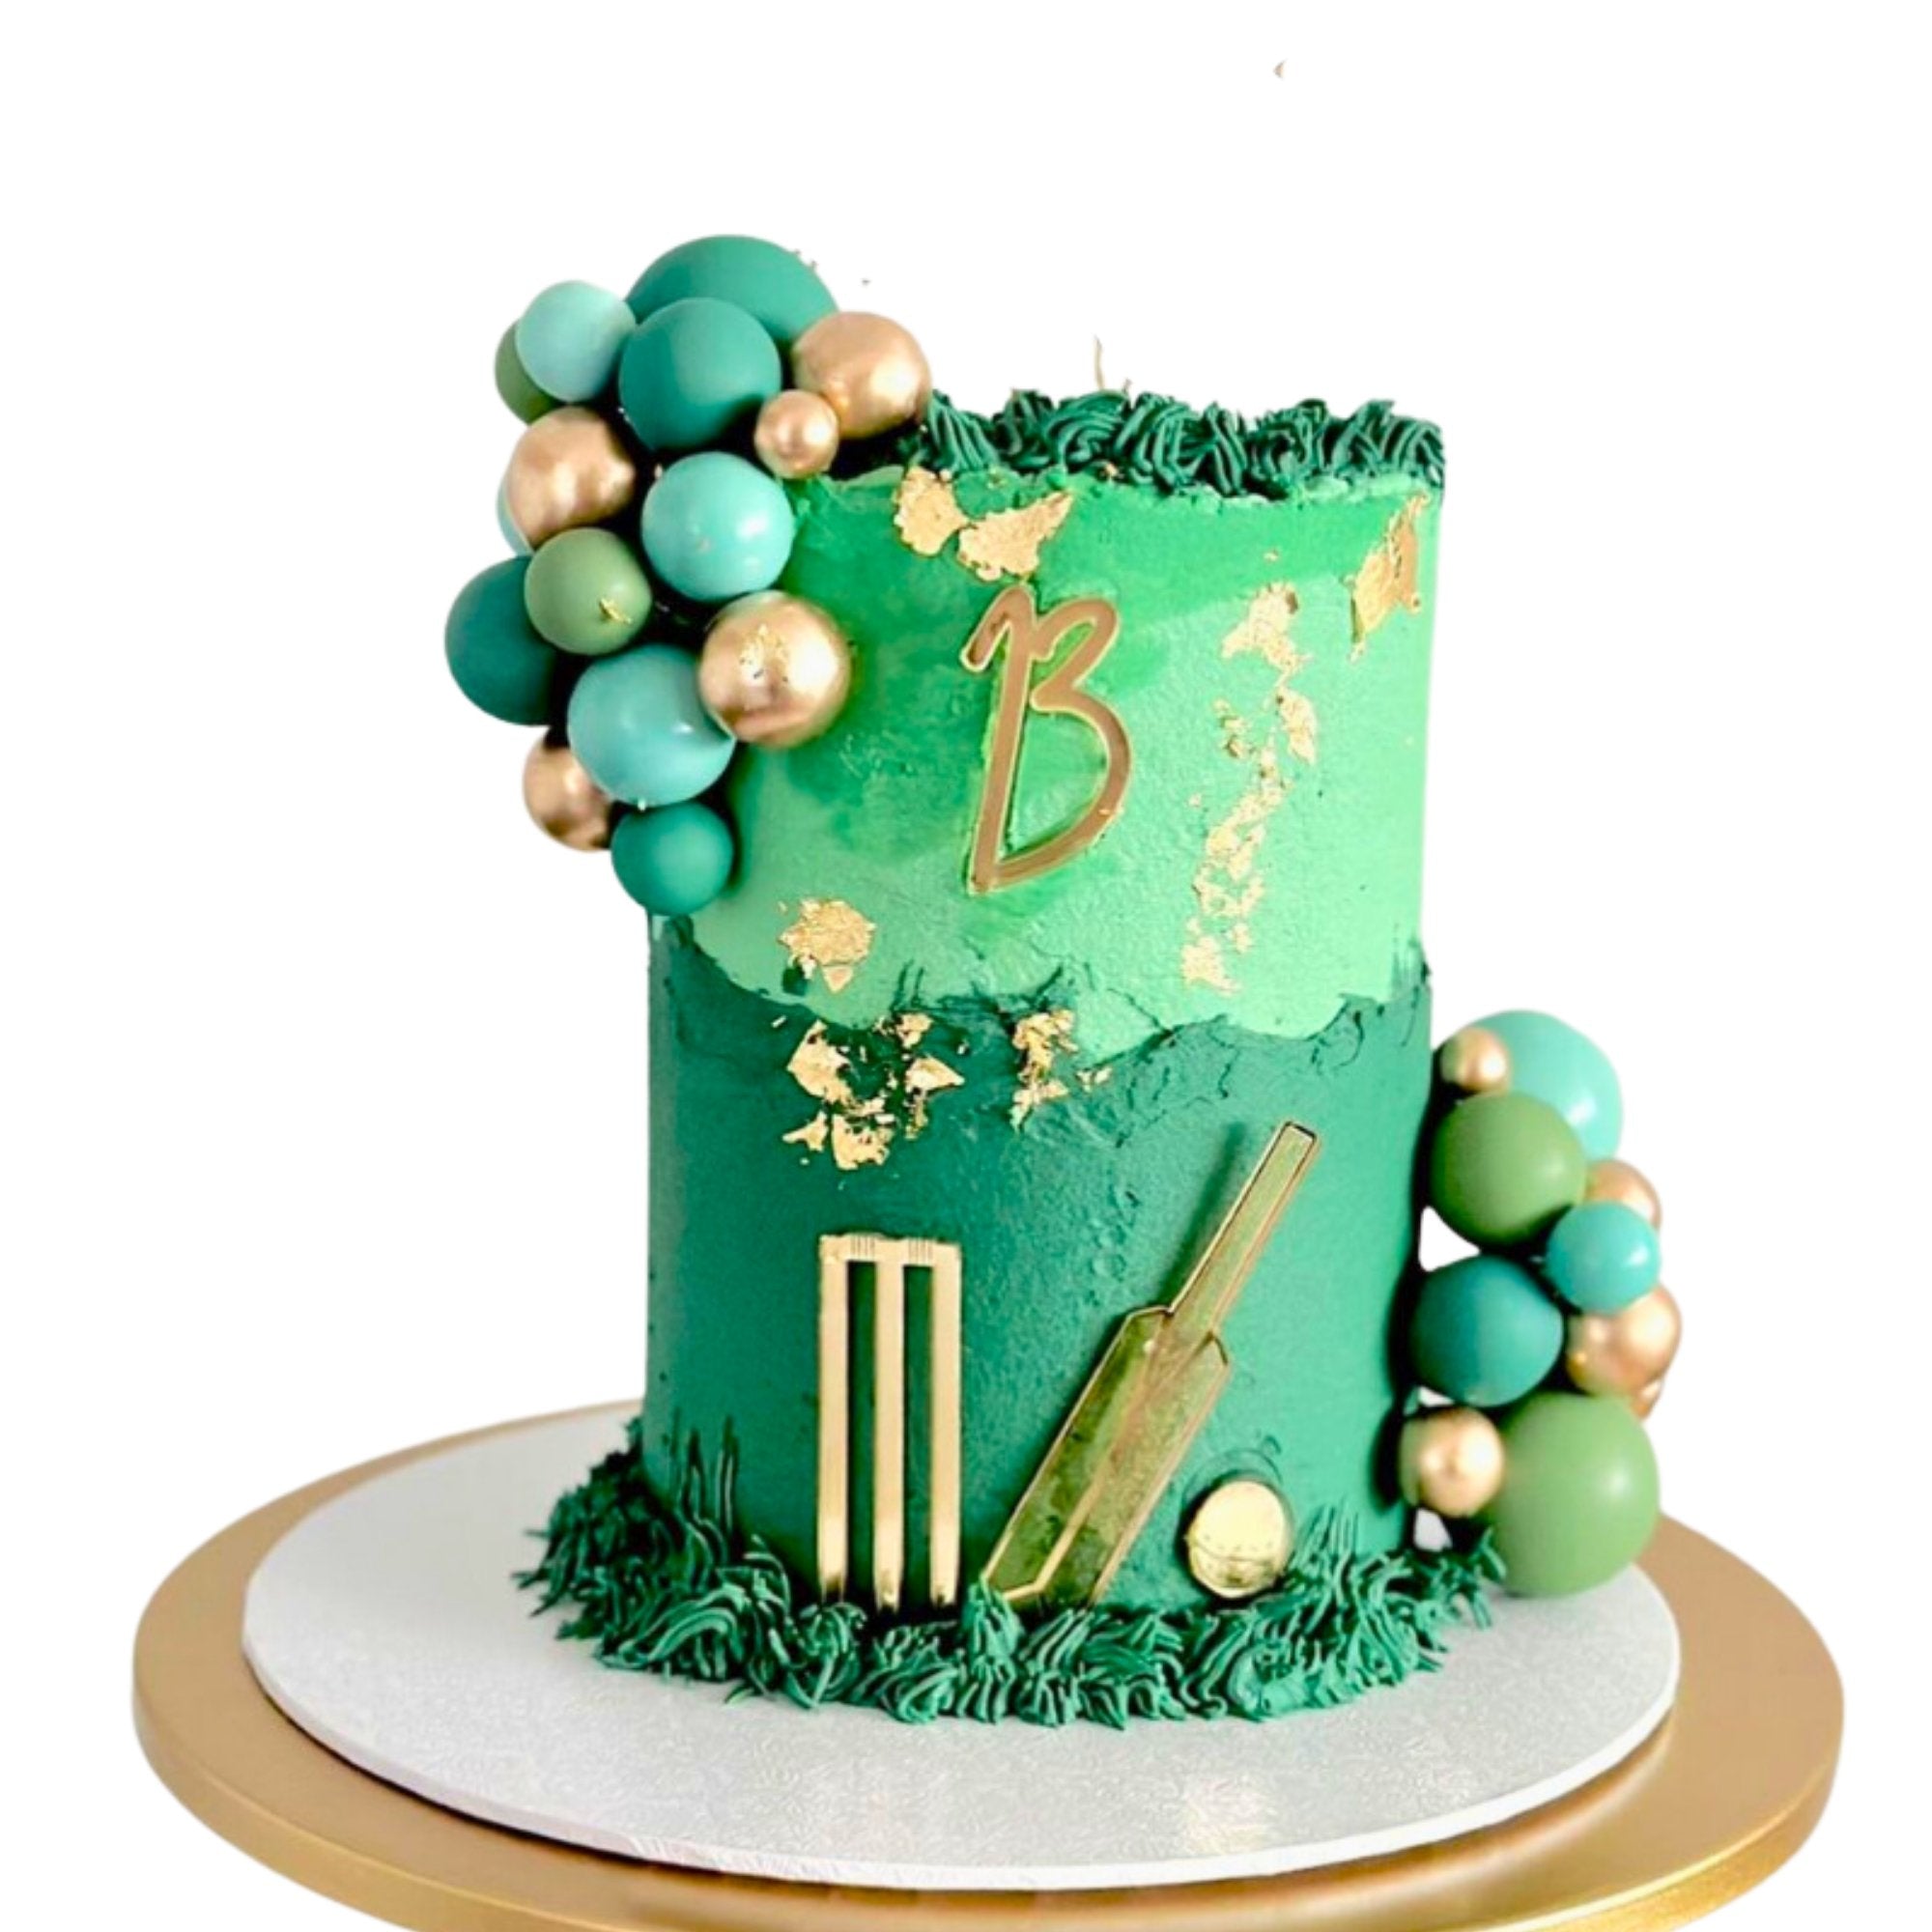 Cricket Cake Topper – your other left ear